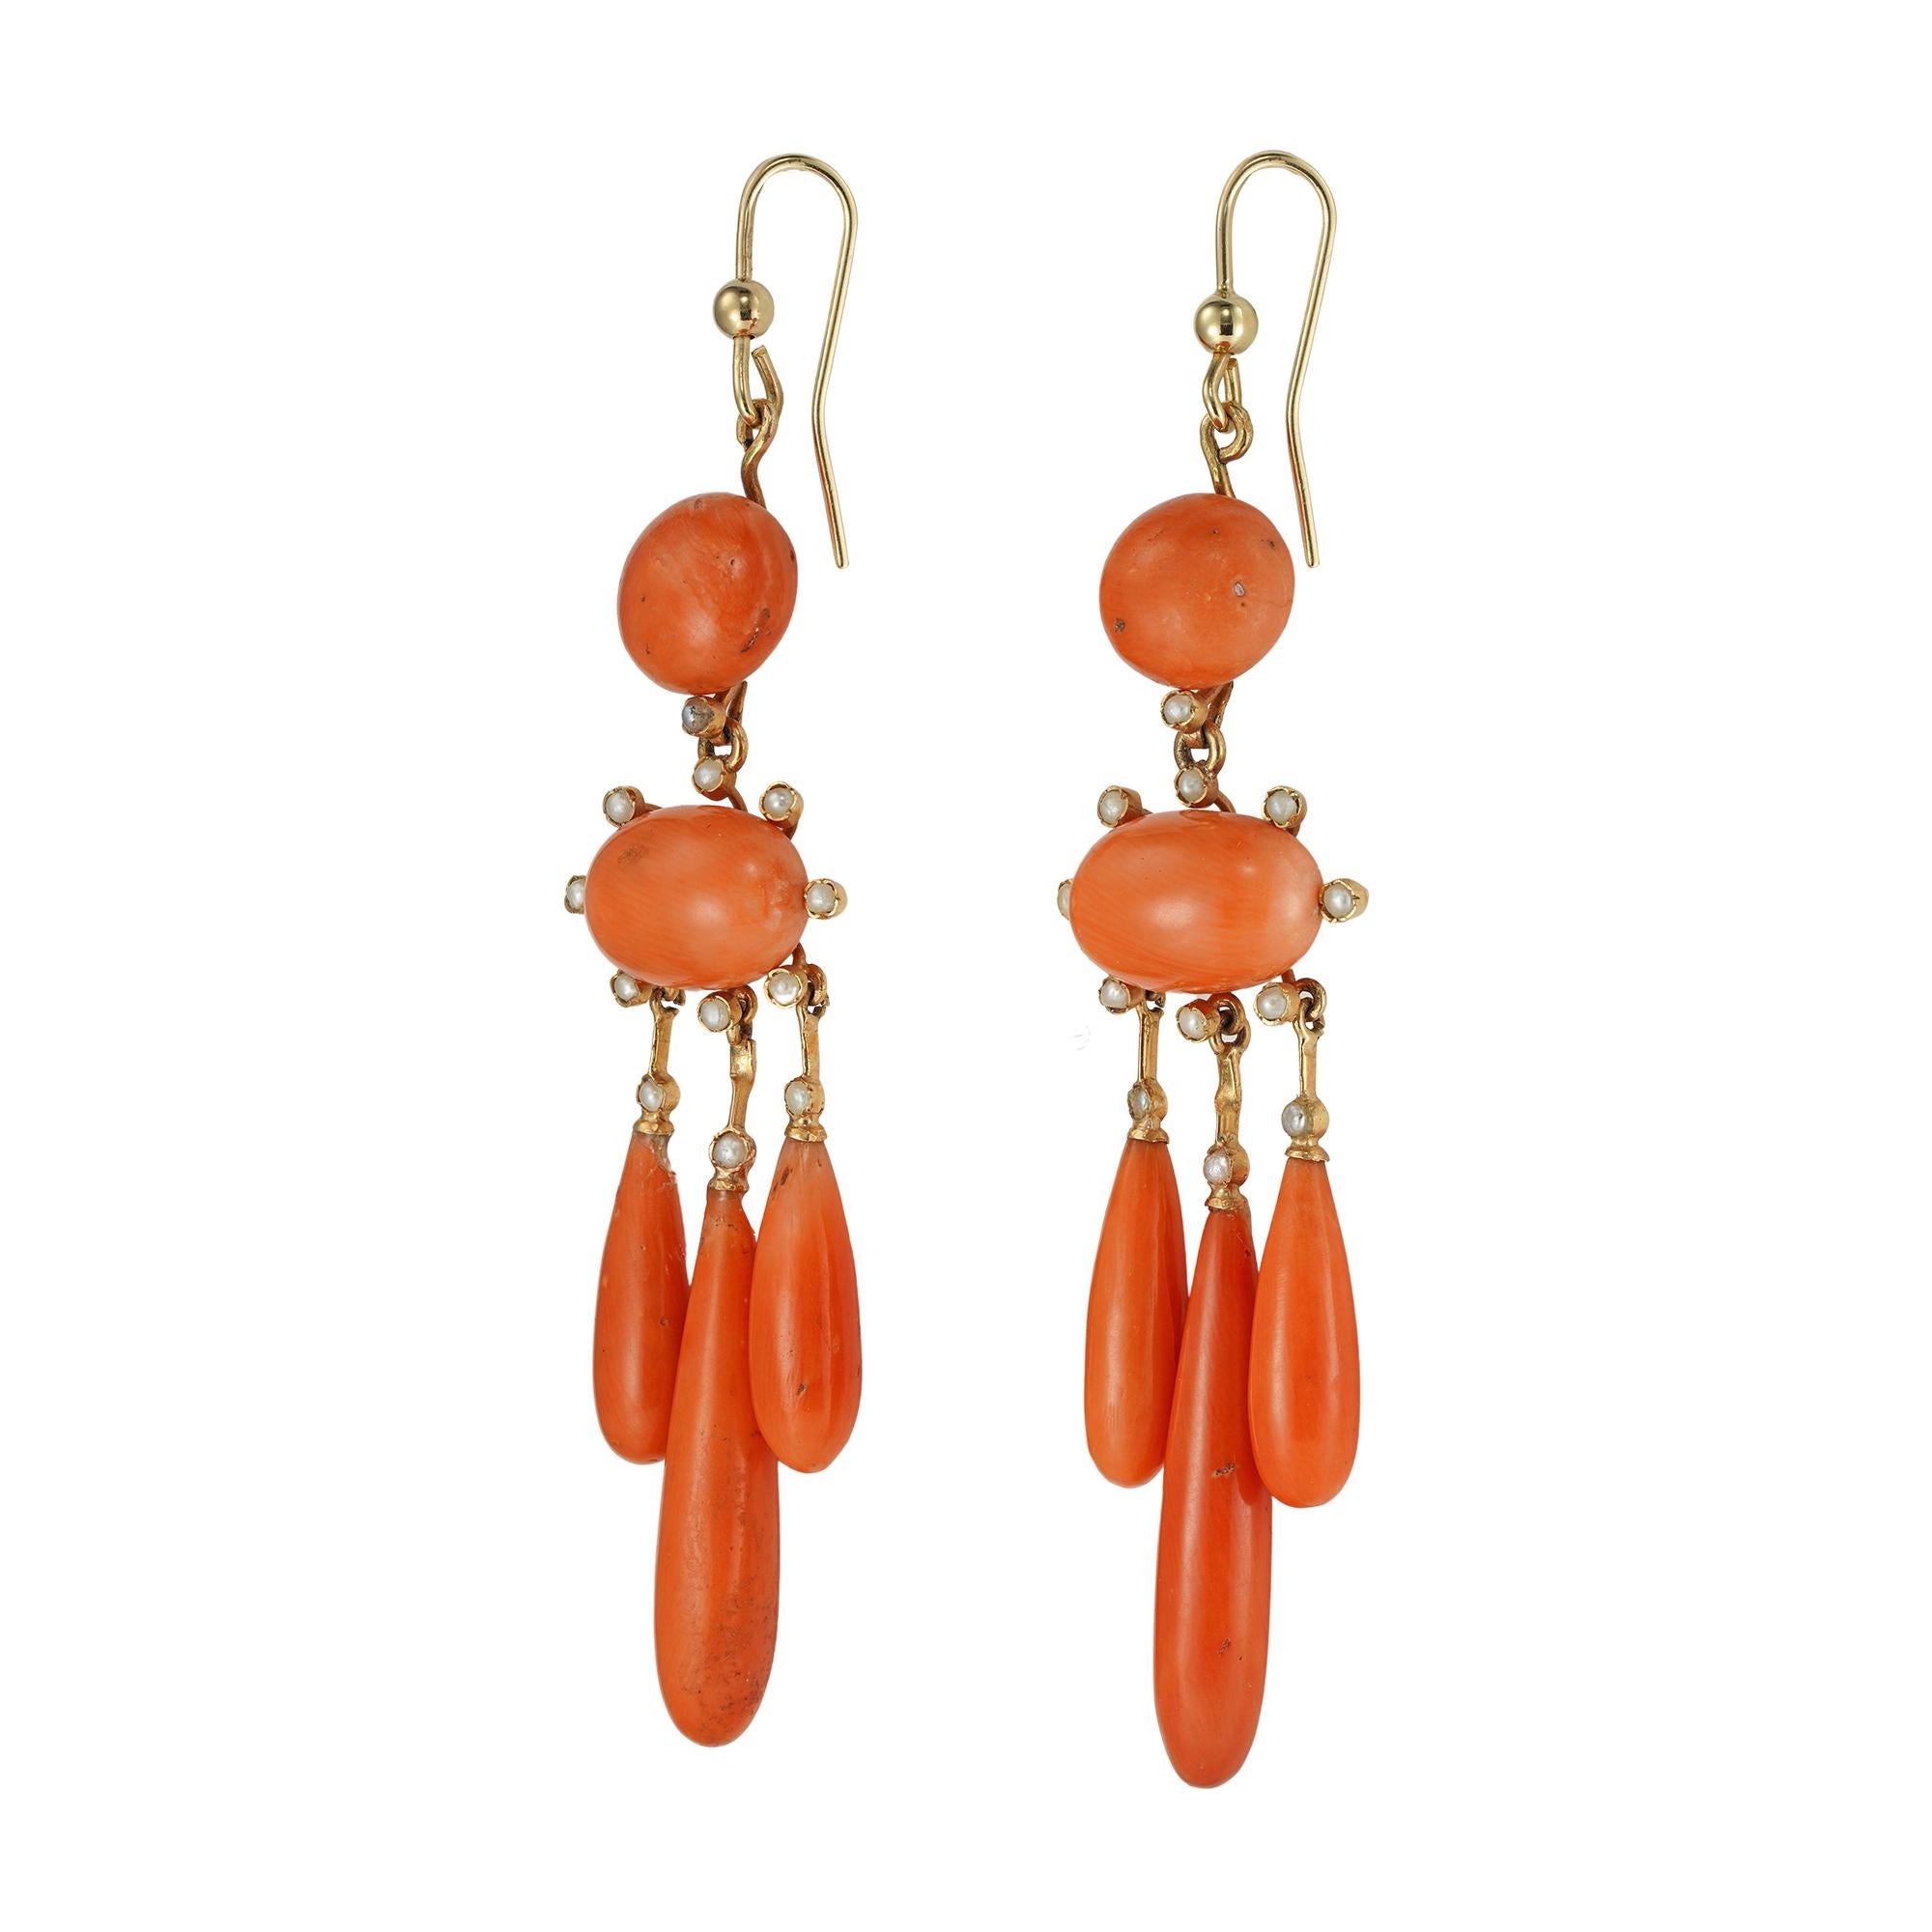 A pair of Victorian coral and pearl drop earrings, each consisting of a round button-shaped coral, suspending an oval button-shaped coral, measuring approximately 12.5x9mm, placed horizontally and surrounded by eight half seed pearls, further